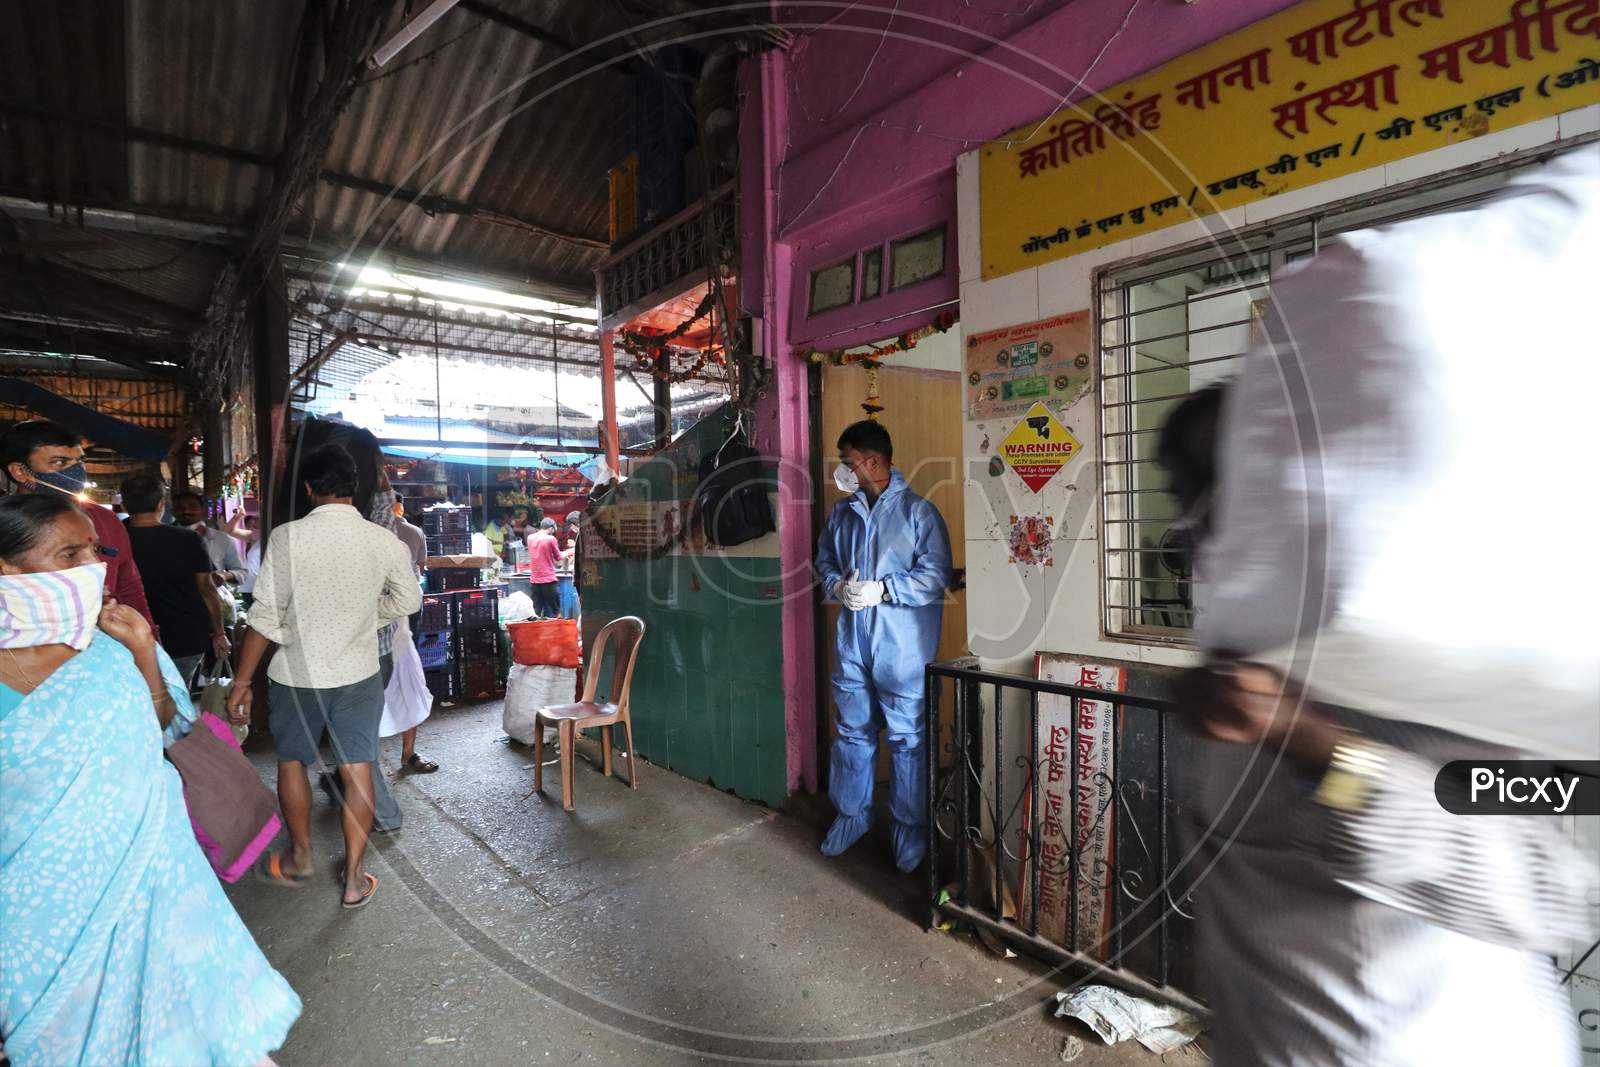 A health worker in personal protective equipment (PPE) waits to collect swab sample from people during a rapid antigen testing campaign for the coronavirus disease (COVID-19), at a vegetable market in Mumbai, India, November 21, 2020.